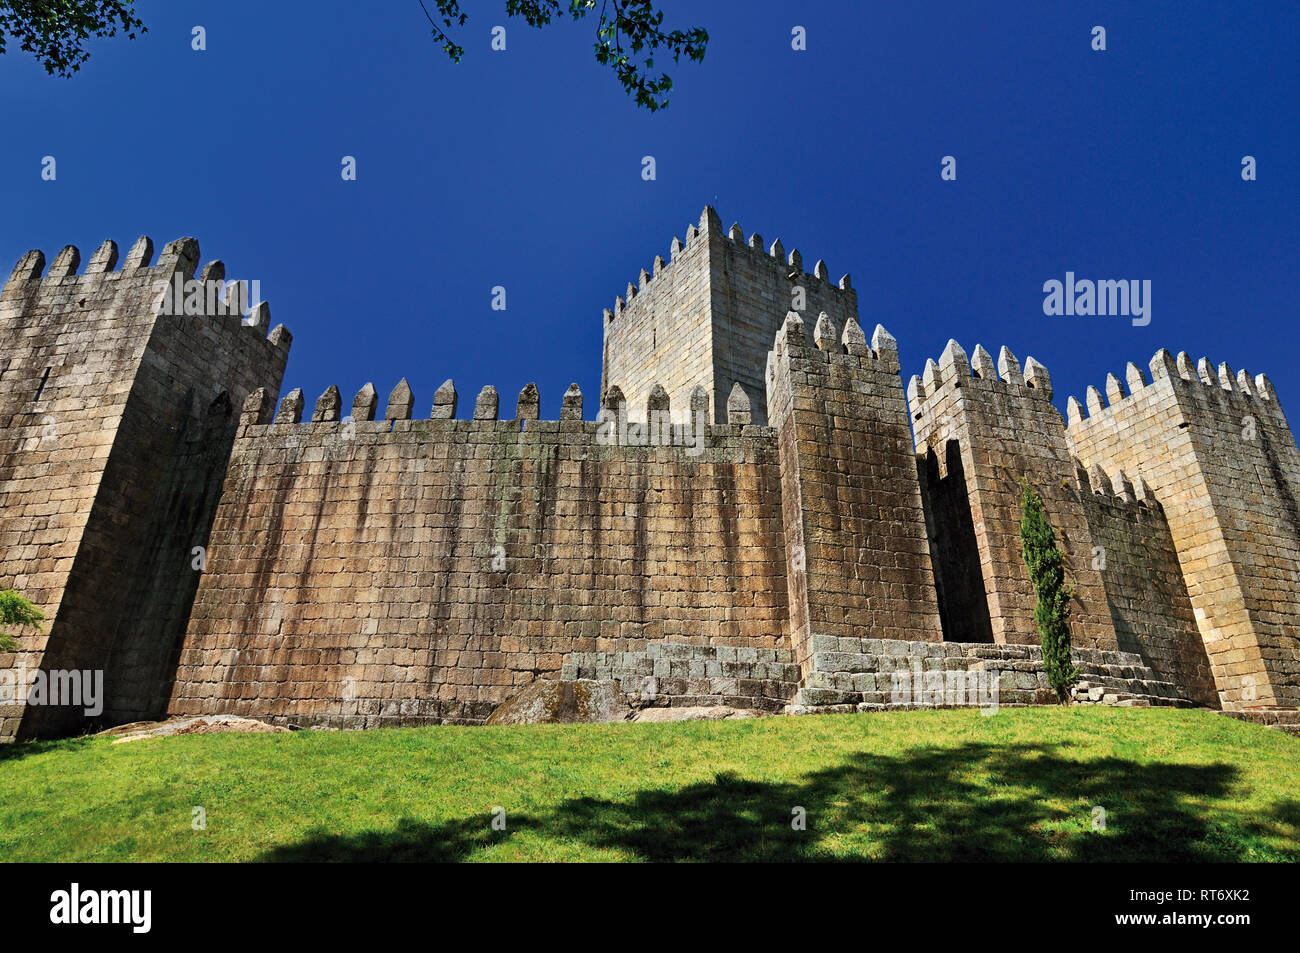 Lateral view of medieval preserved castle on a hill with blue sky Stock Photo